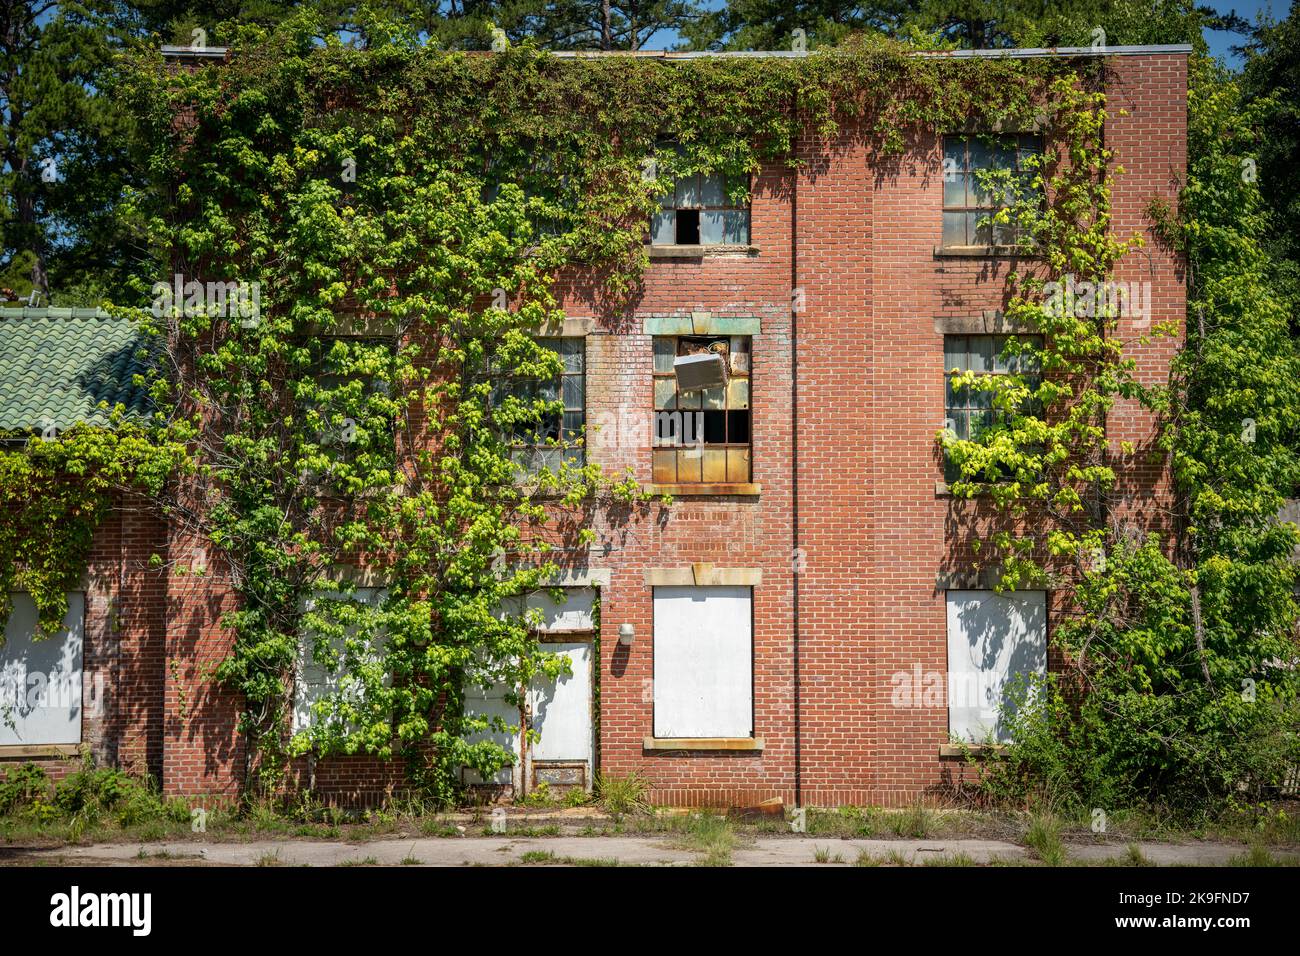 Old abandoned building in America is being taken over by plants Stock Photo